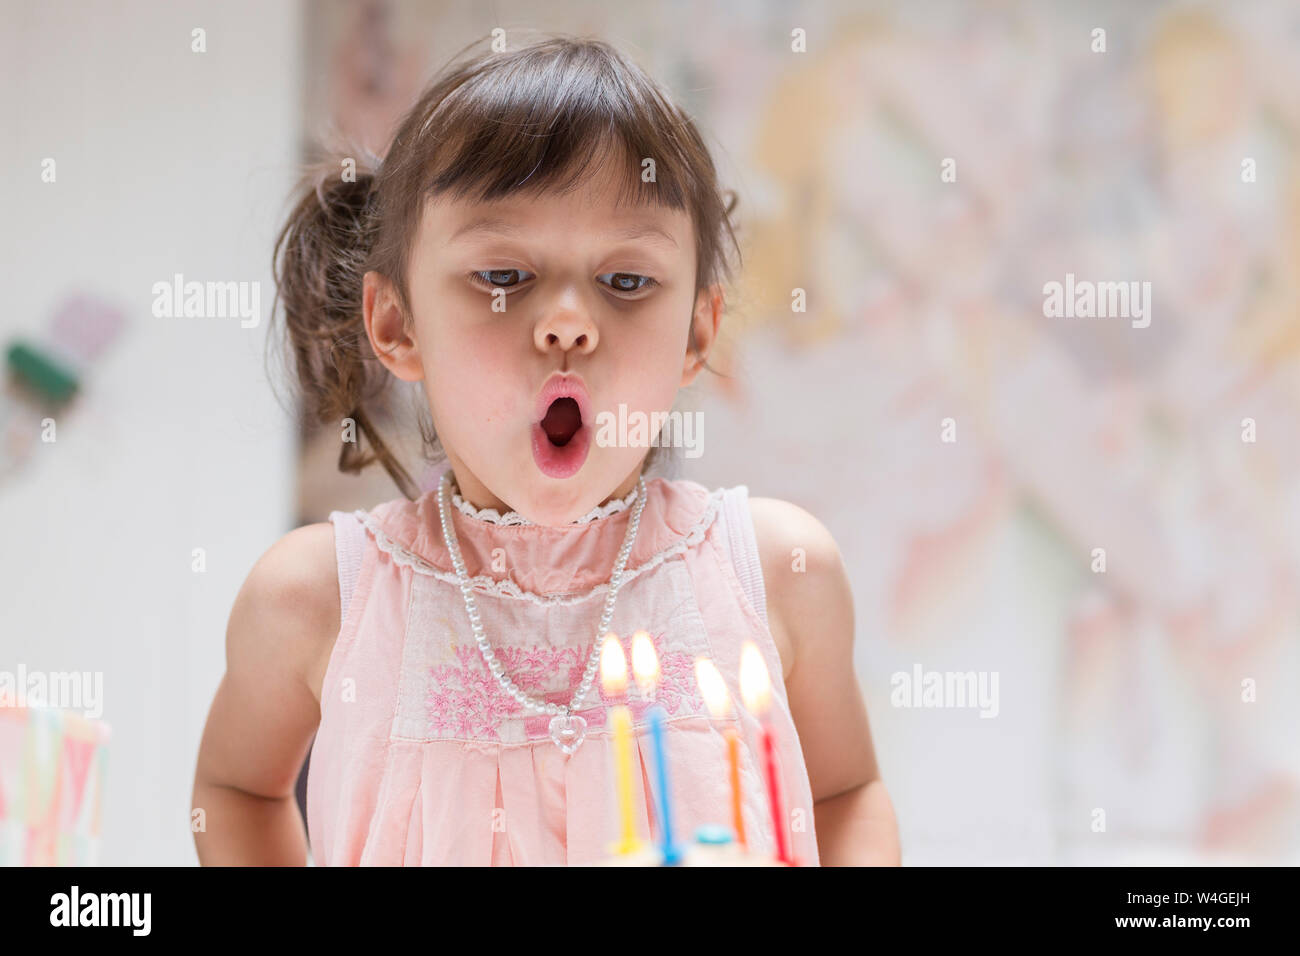 Portrait of little girl blowing out burning candles on her birthday cake Stock Photo